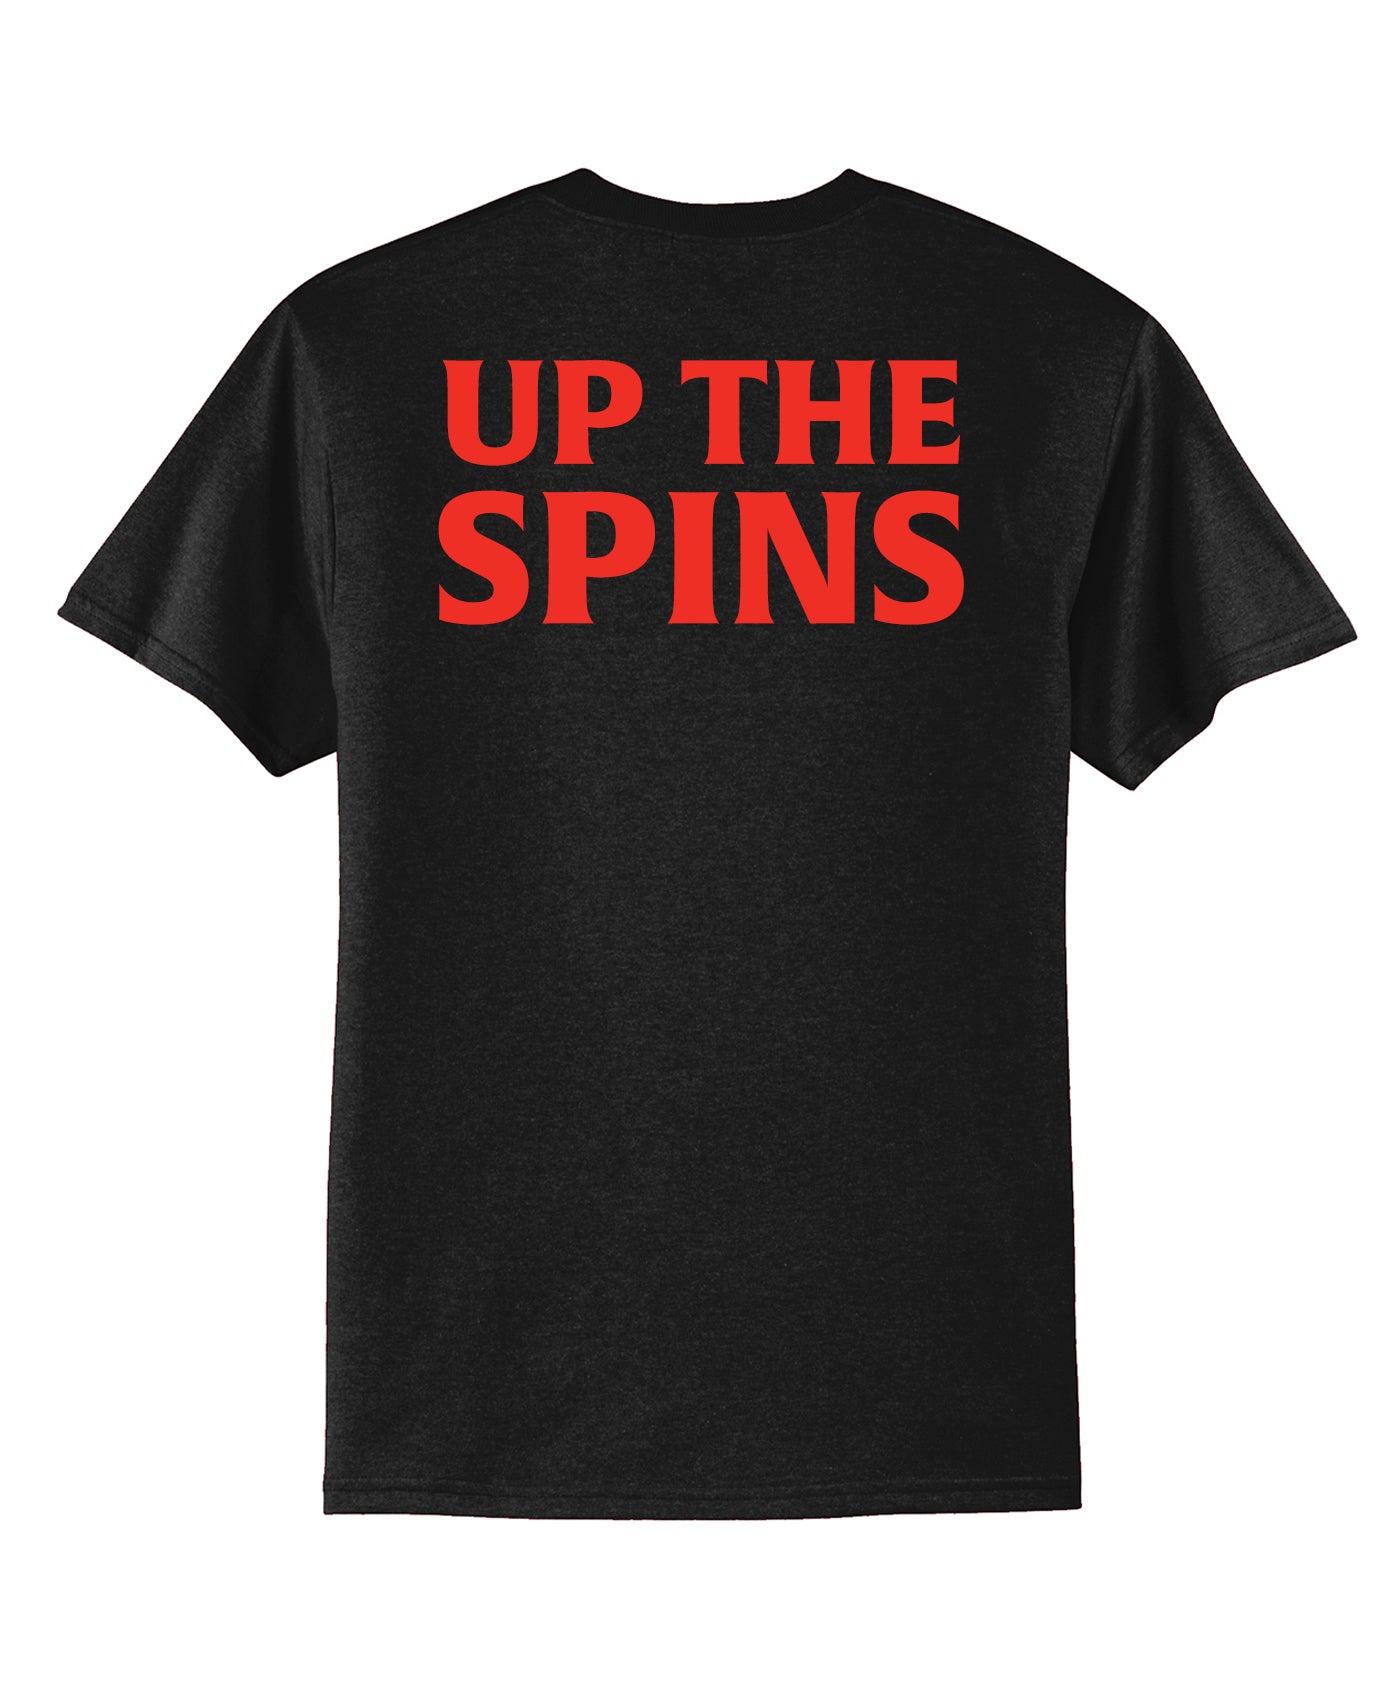 The Up the Spins Tee